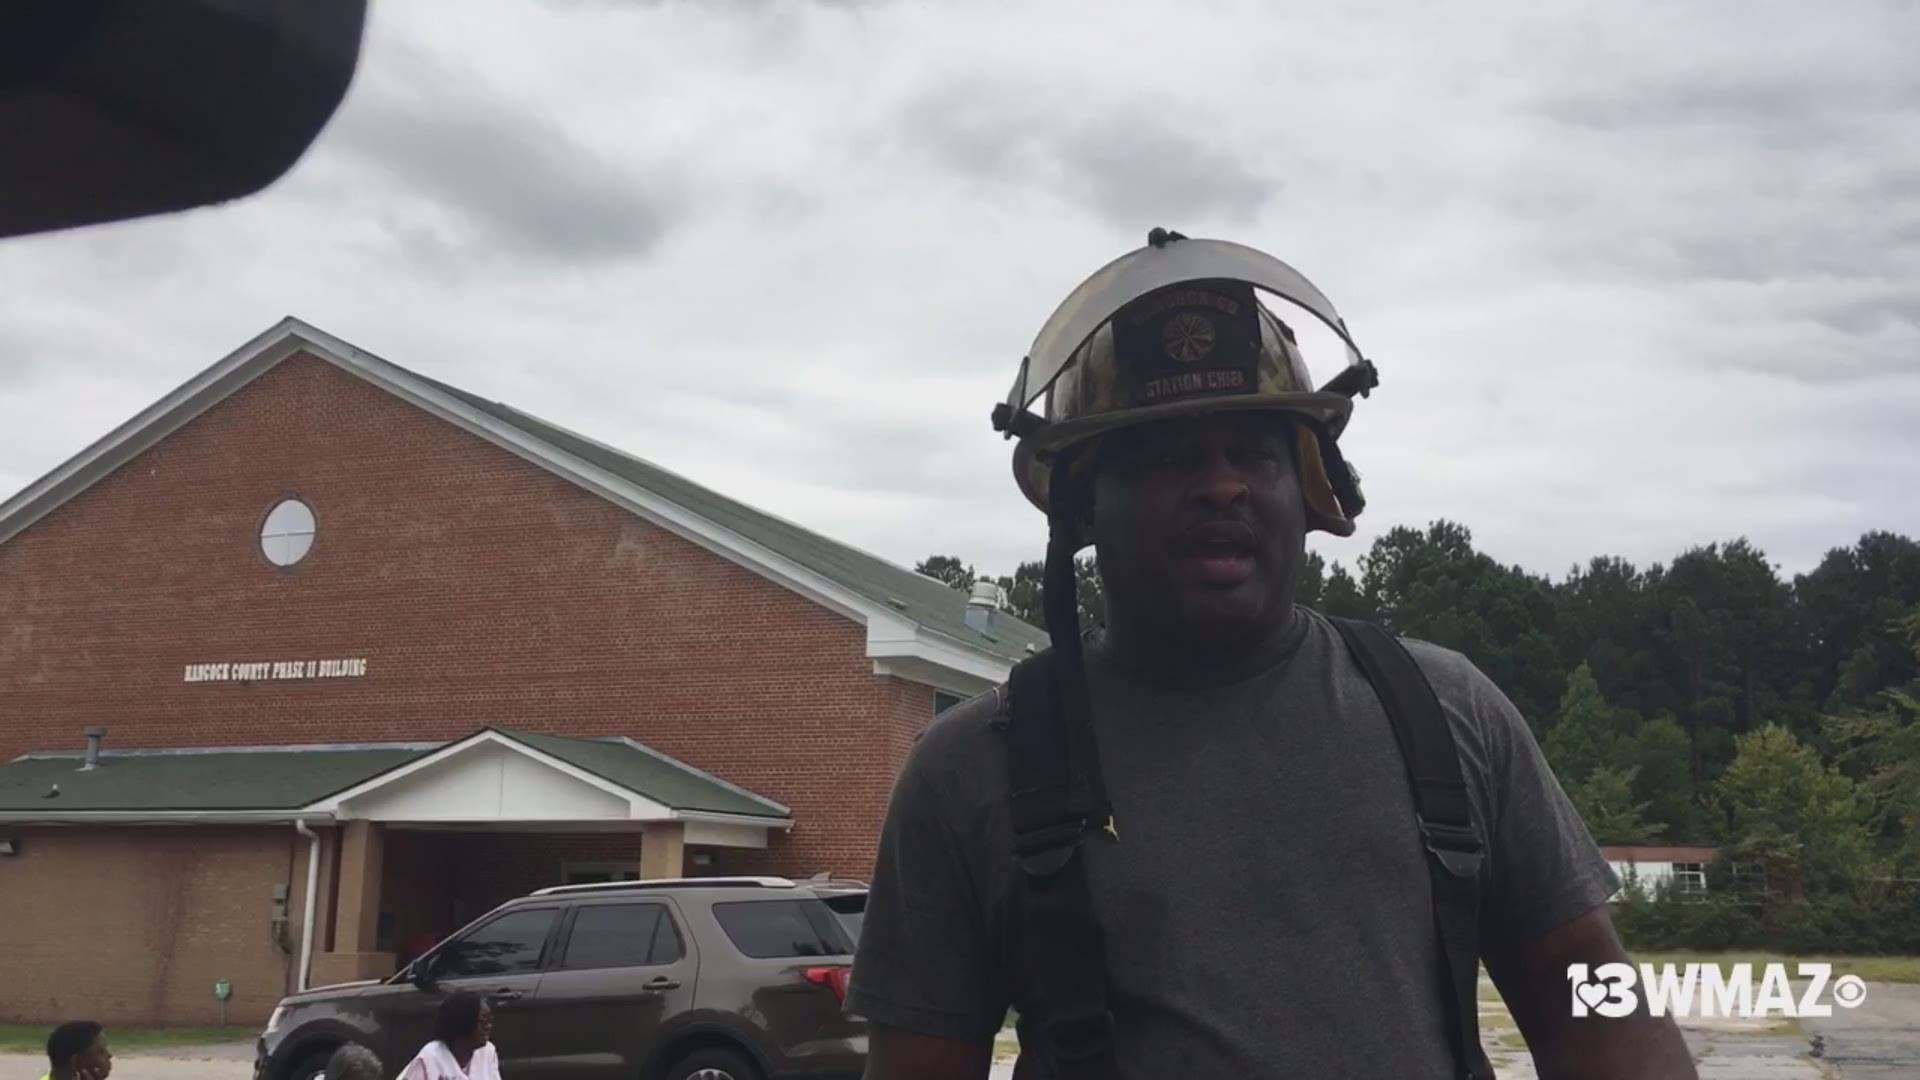 A fire broke out at a Hancock County Board of Education building on Augusta Highway Sunday afternoon. Assistant Chief for the Hancock County Fire Department Mario Chapple says no one was injured or inside the building at the time of the fire.